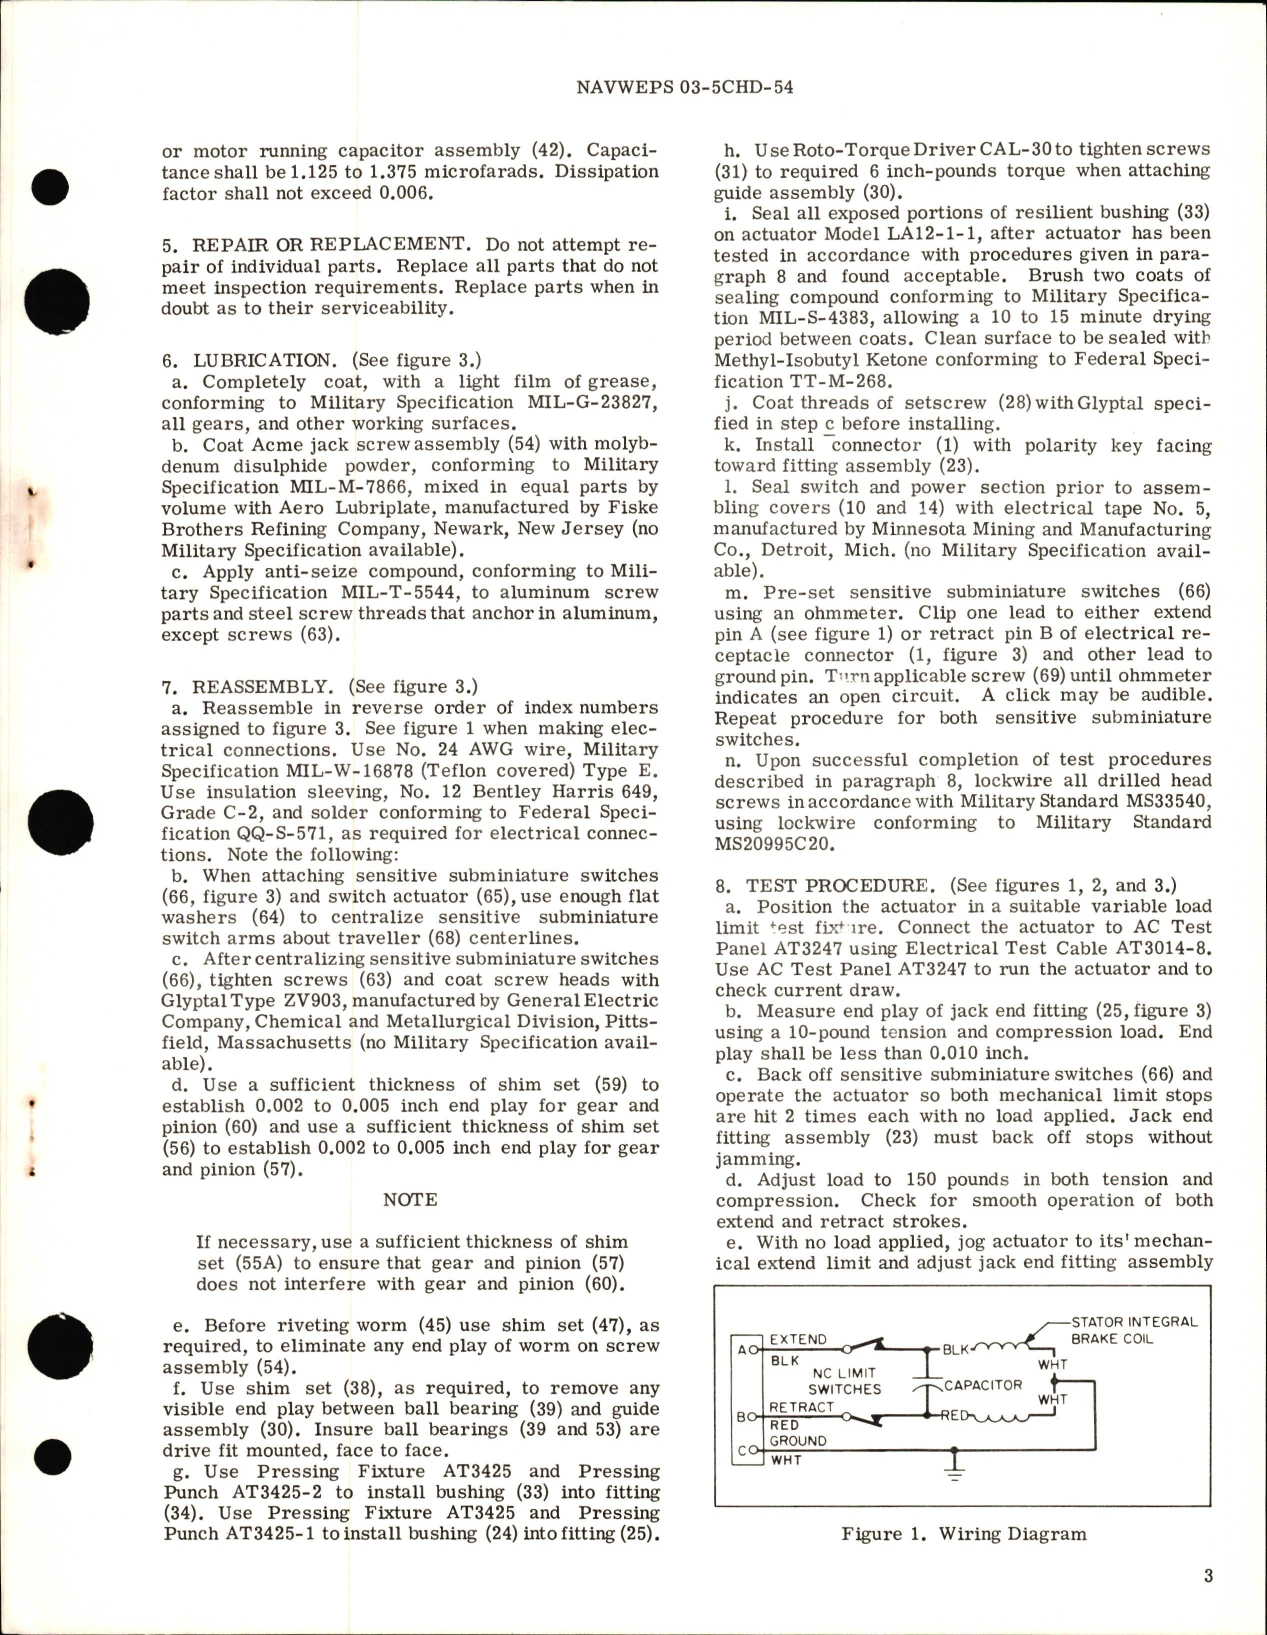 Sample page 5 from AirCorps Library document: Overhaul Instructions with Parts Breakdown for Electro-Mechanical Linear Actuator Model LA12-1, LA12-1-1, R1680-628-4058-XABN, and RH1680-822-3041-XABM